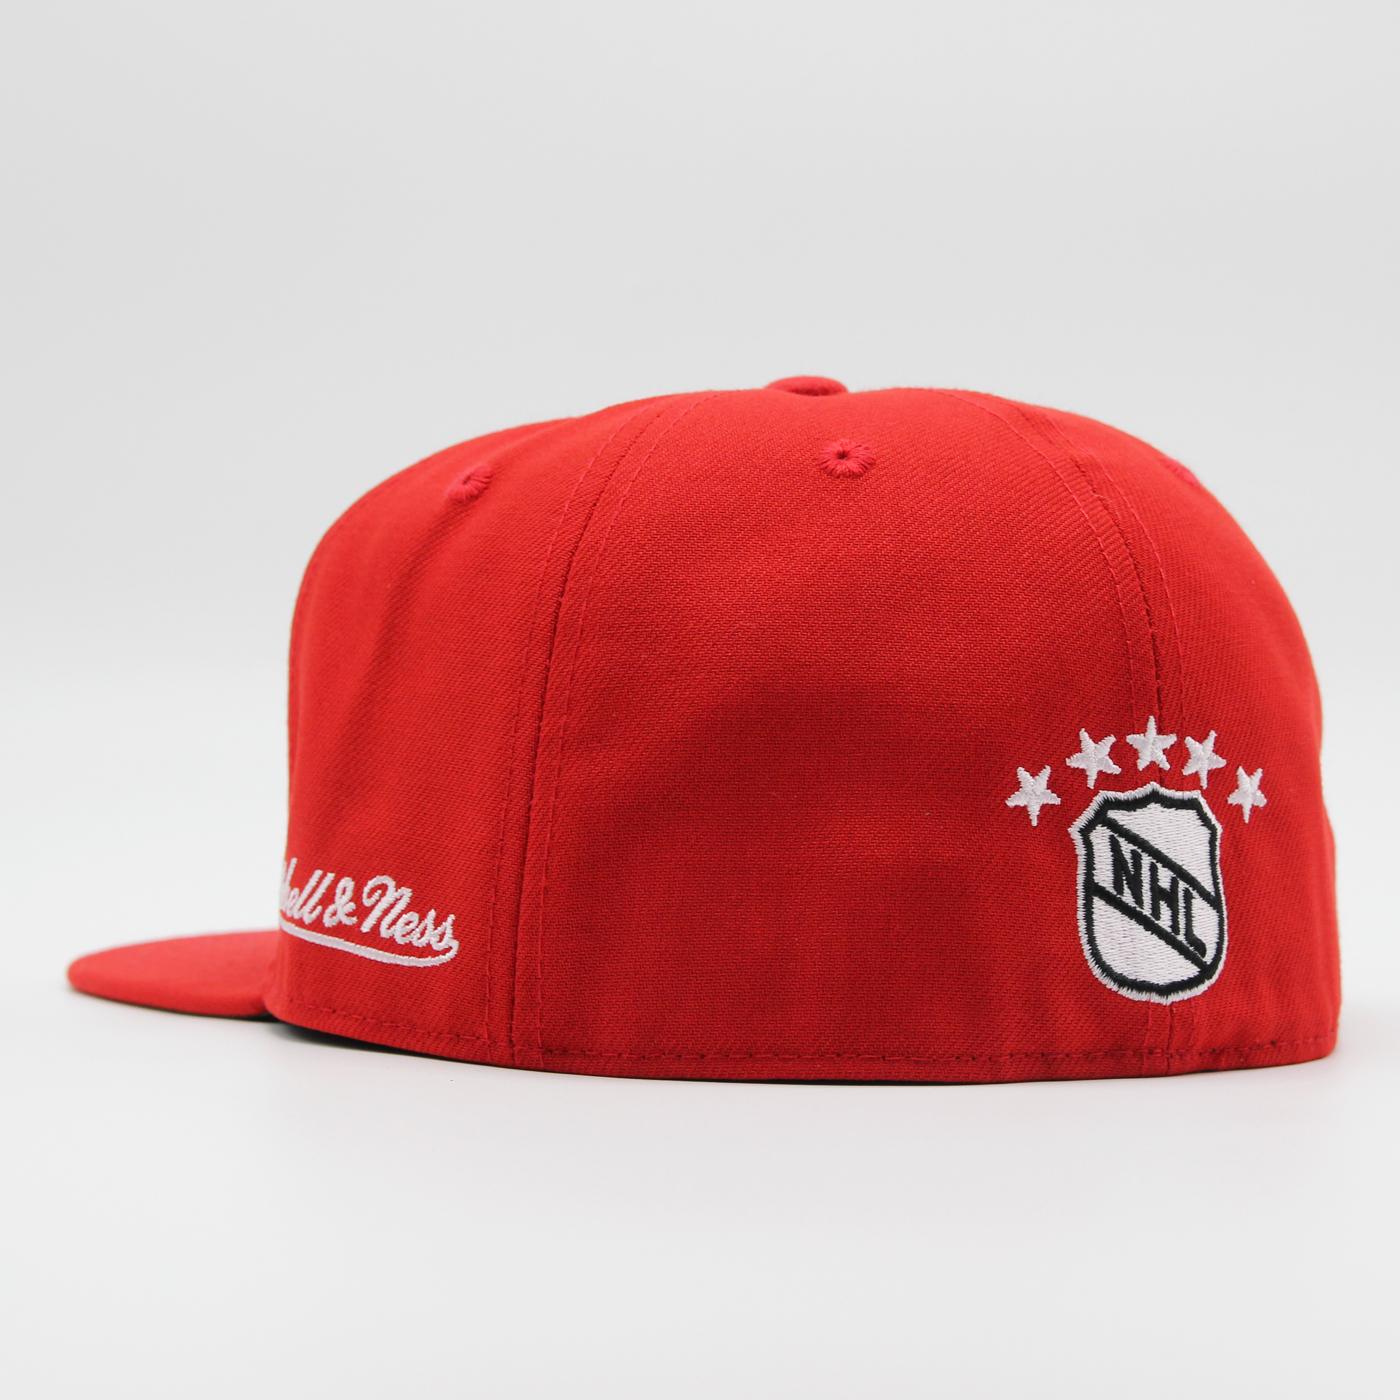 Mitchell & Ness NHL Vintage Fitted NJ Devils red